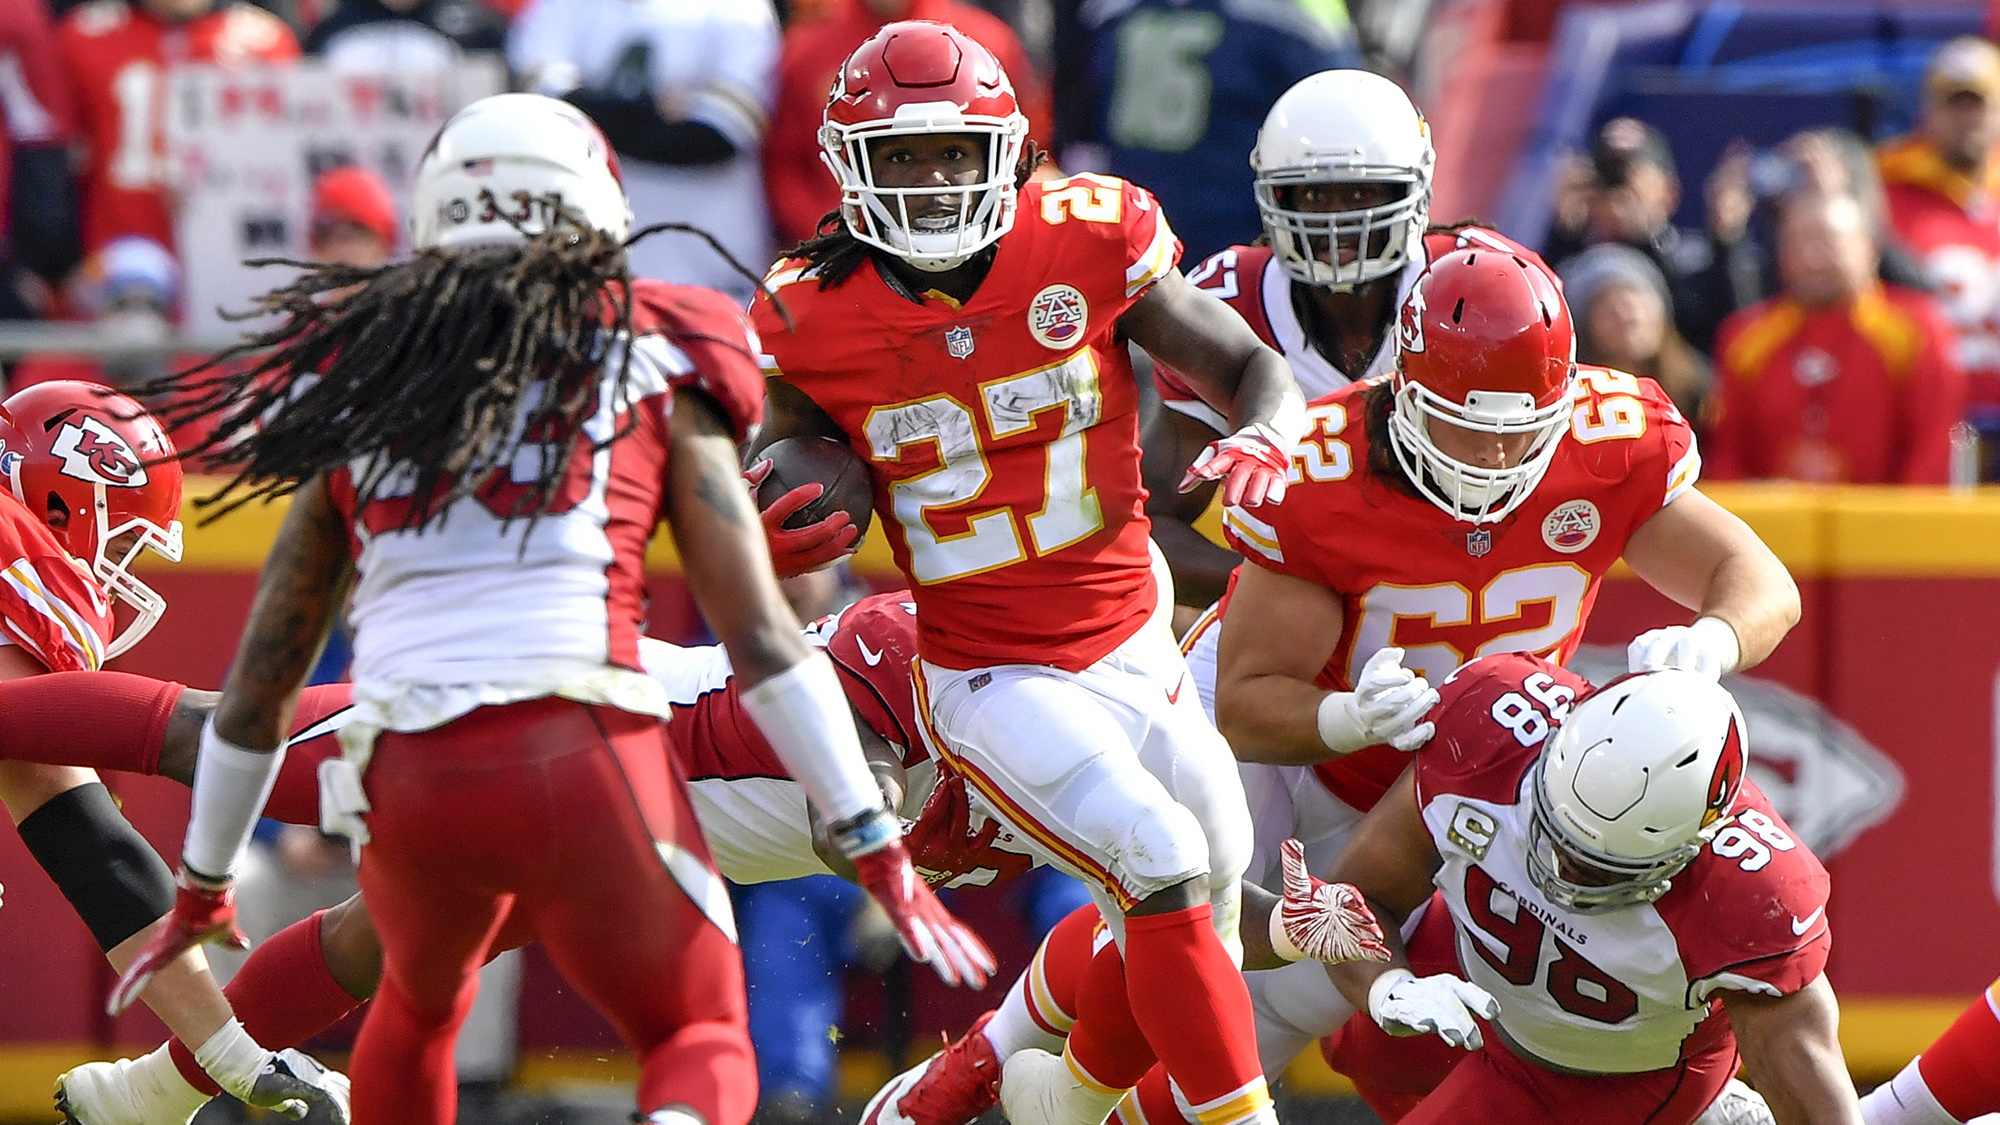 Chiefs vs Cardinals live stream how to watch NFL preseason online from